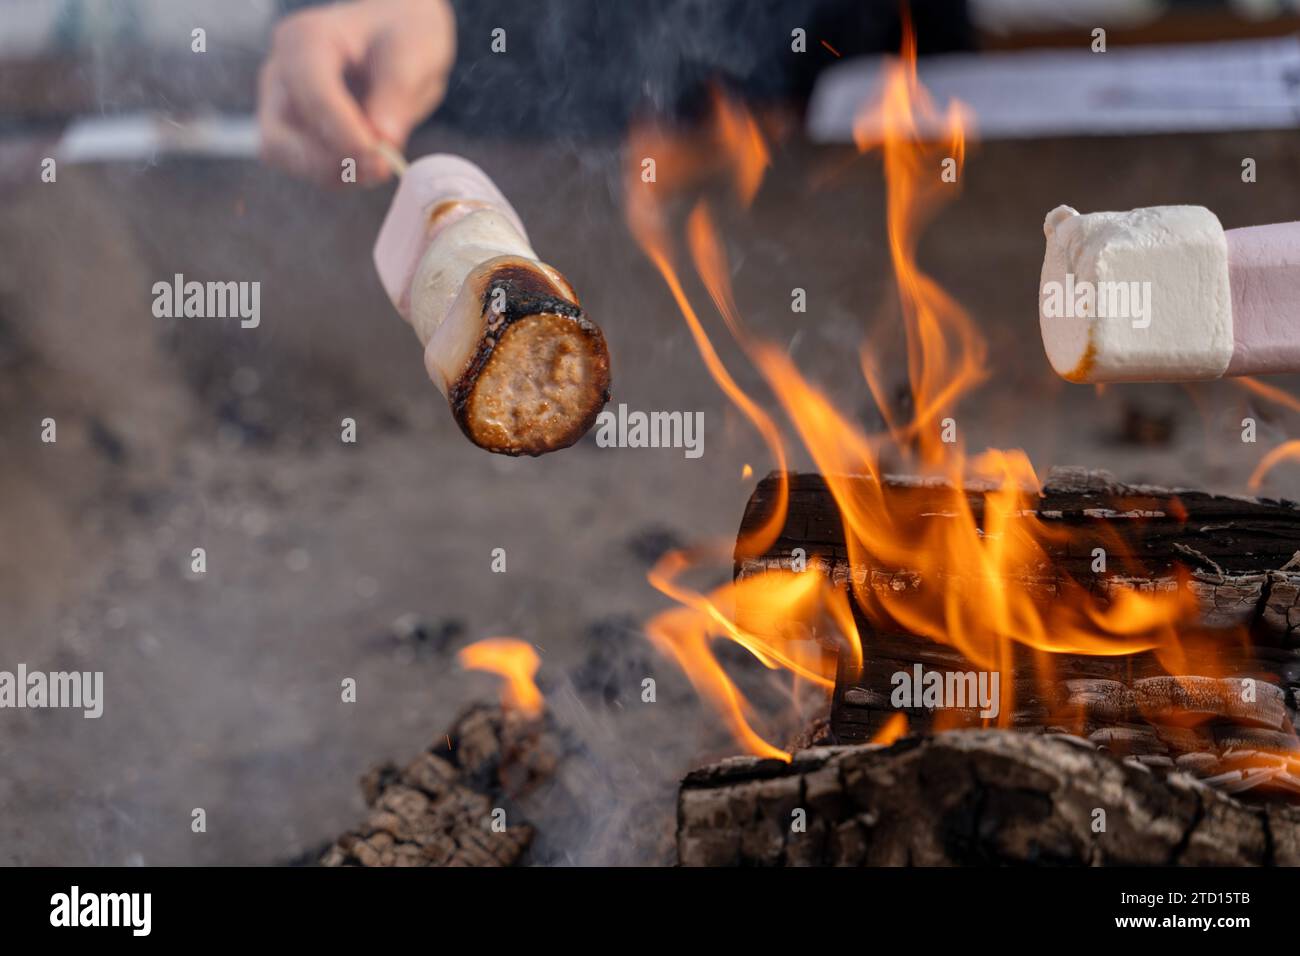 Southampton, England - December 8, 2023: Hands holding marshmallows on a wooden skewer over a fire. Grilled marshmallows *** Hände halten Marshmallows auf einem Holzspieß über ein Feuer. Gegrillte Marshmallows Stock Photo